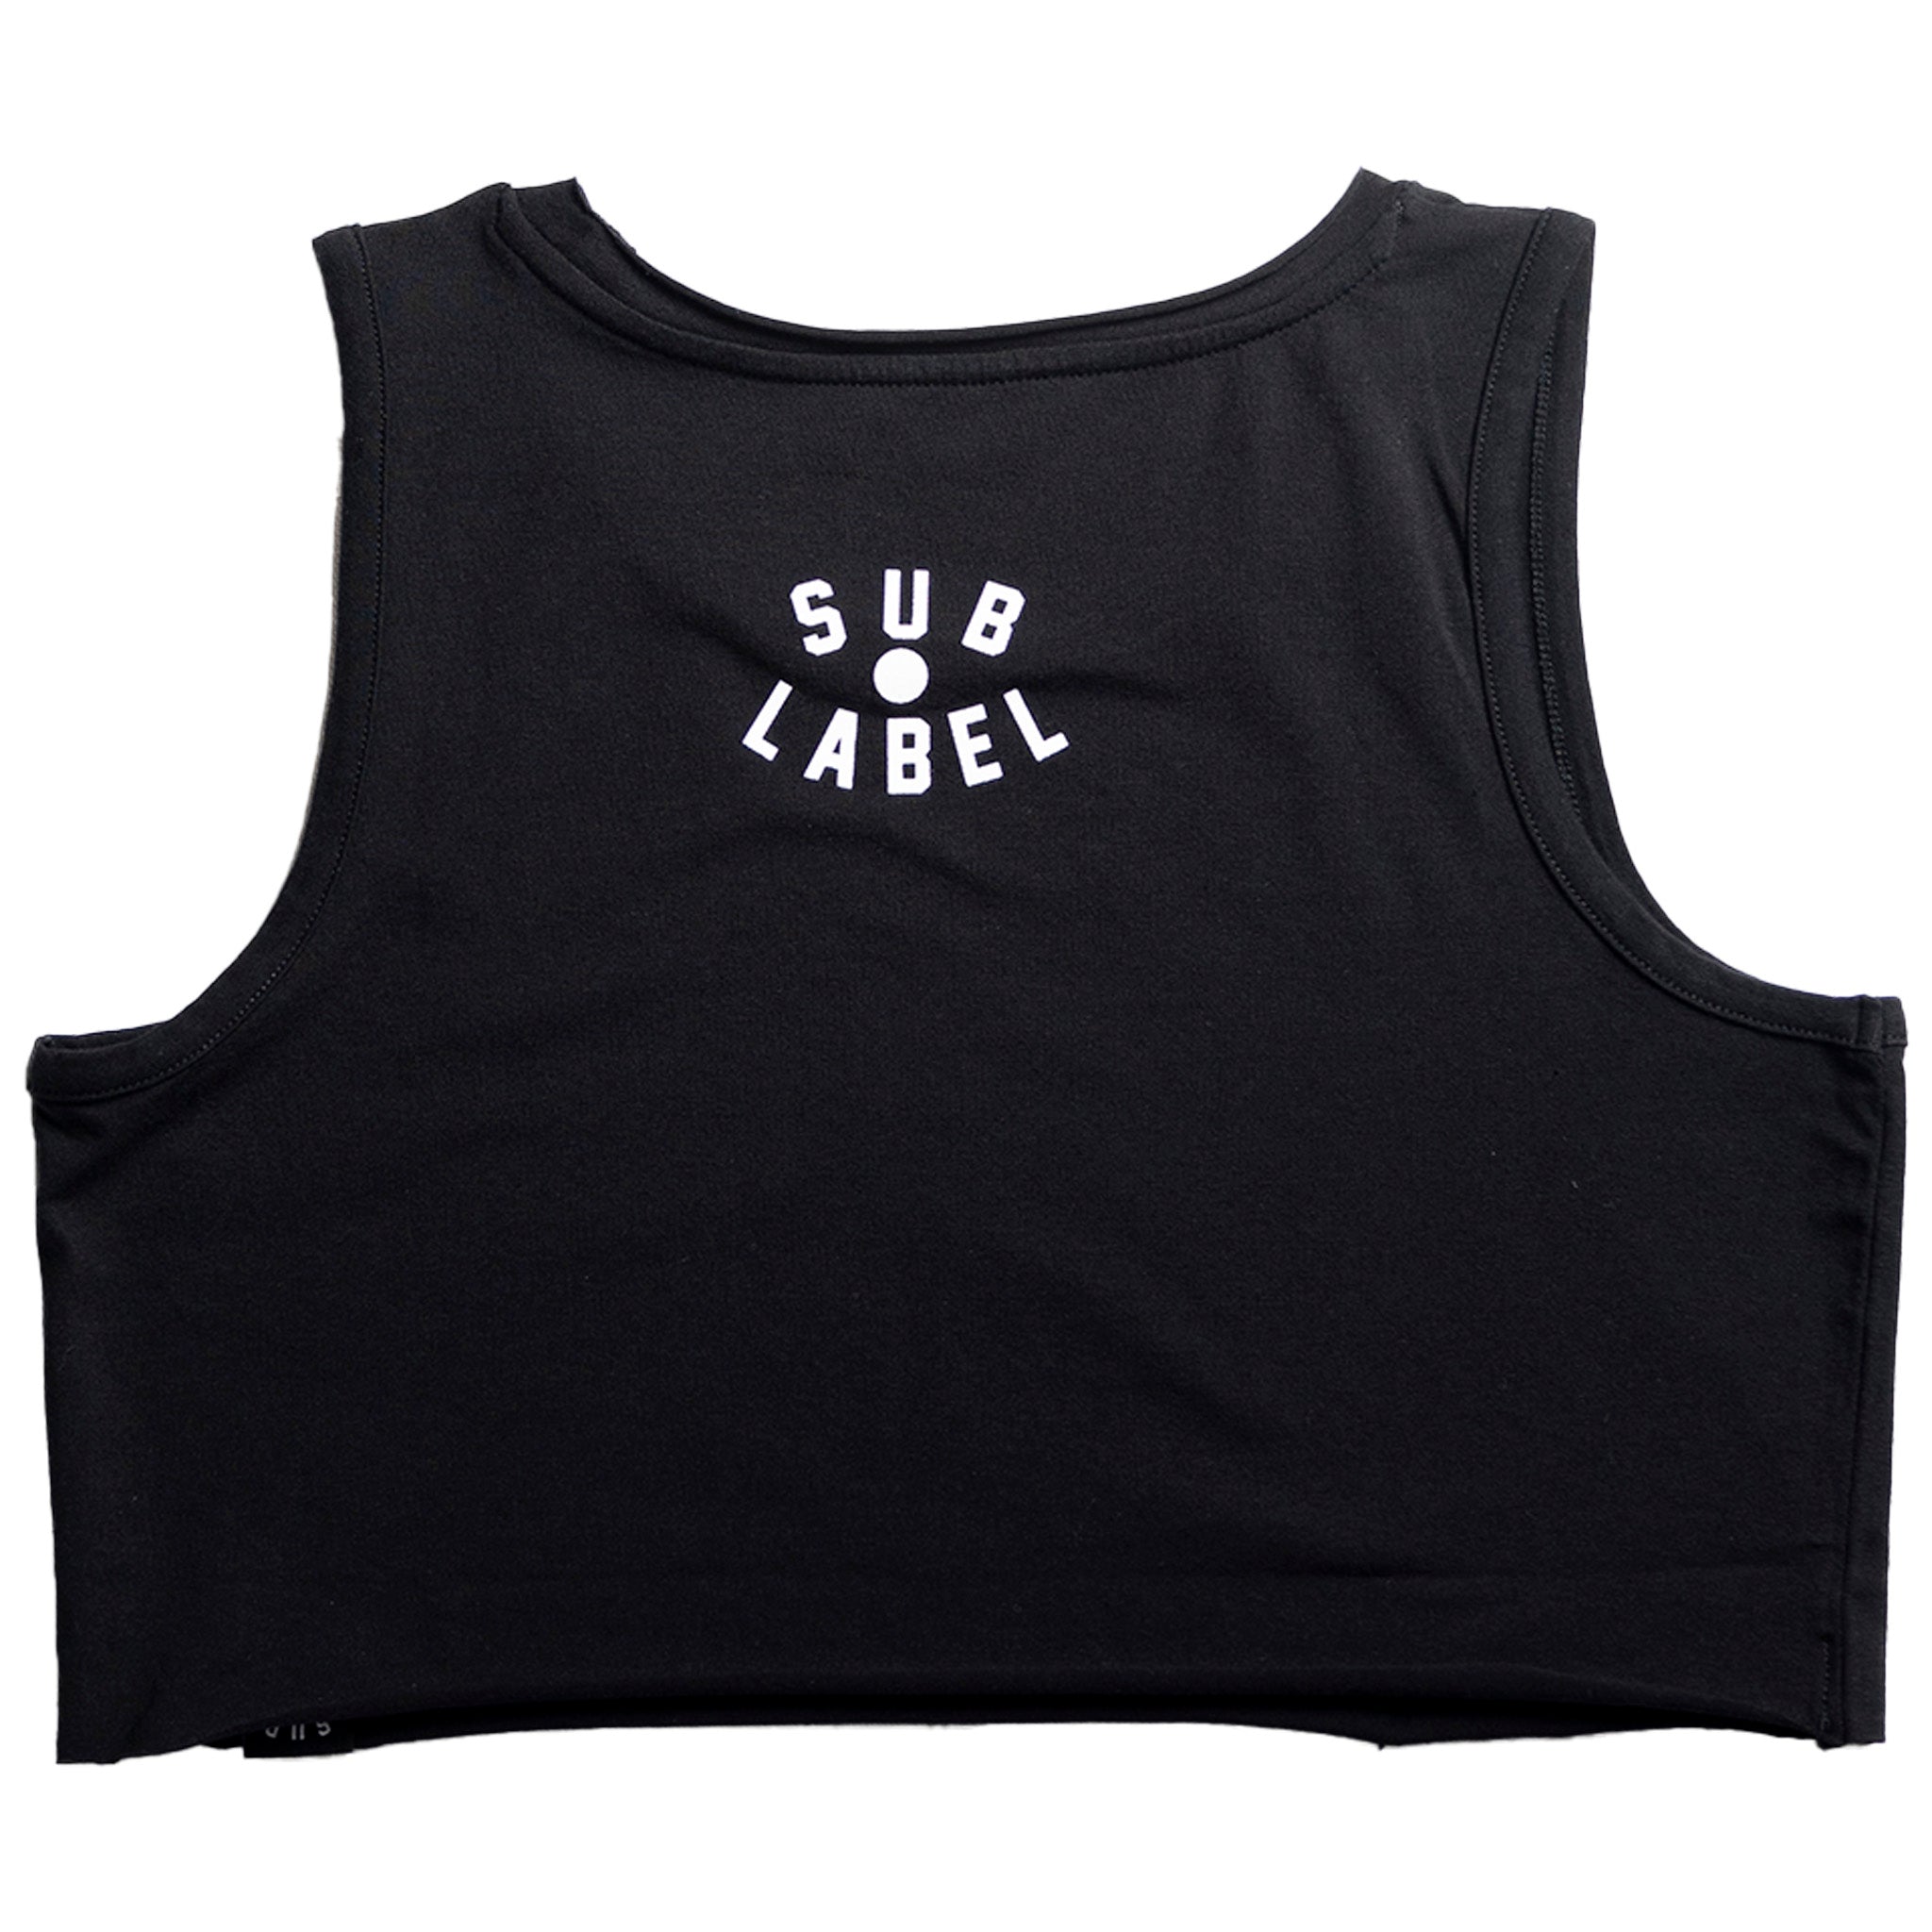 nobody listens to techno • crop tank top